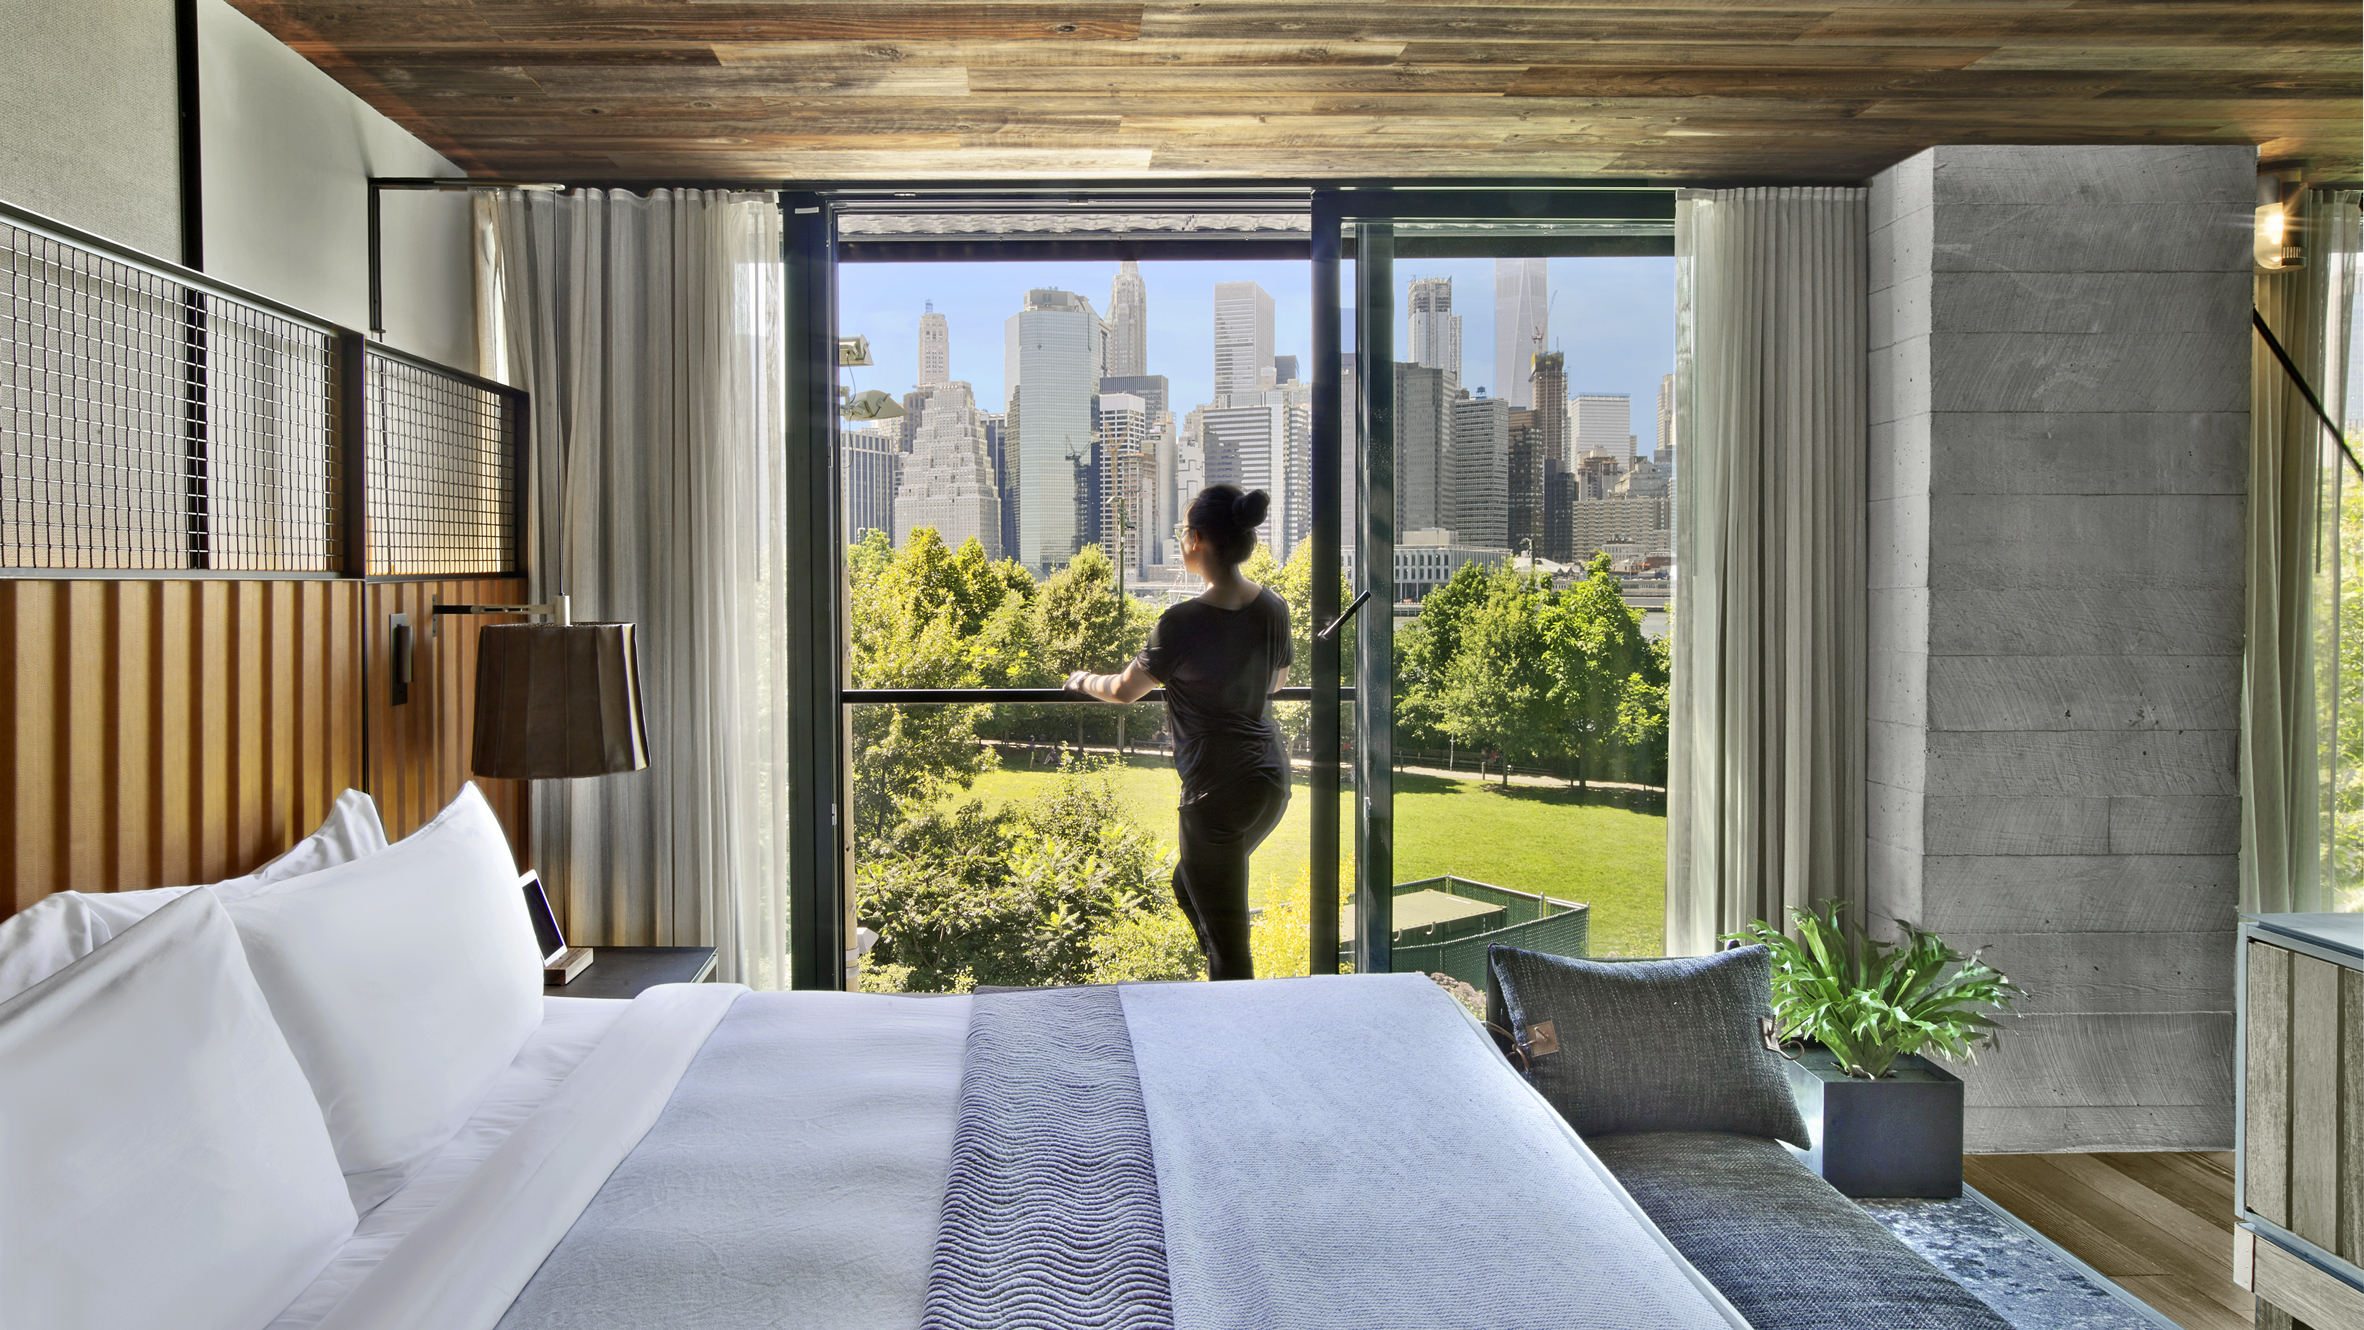 1 Hotel Brooklyn Bridge Allows You To Be Part Of The Park